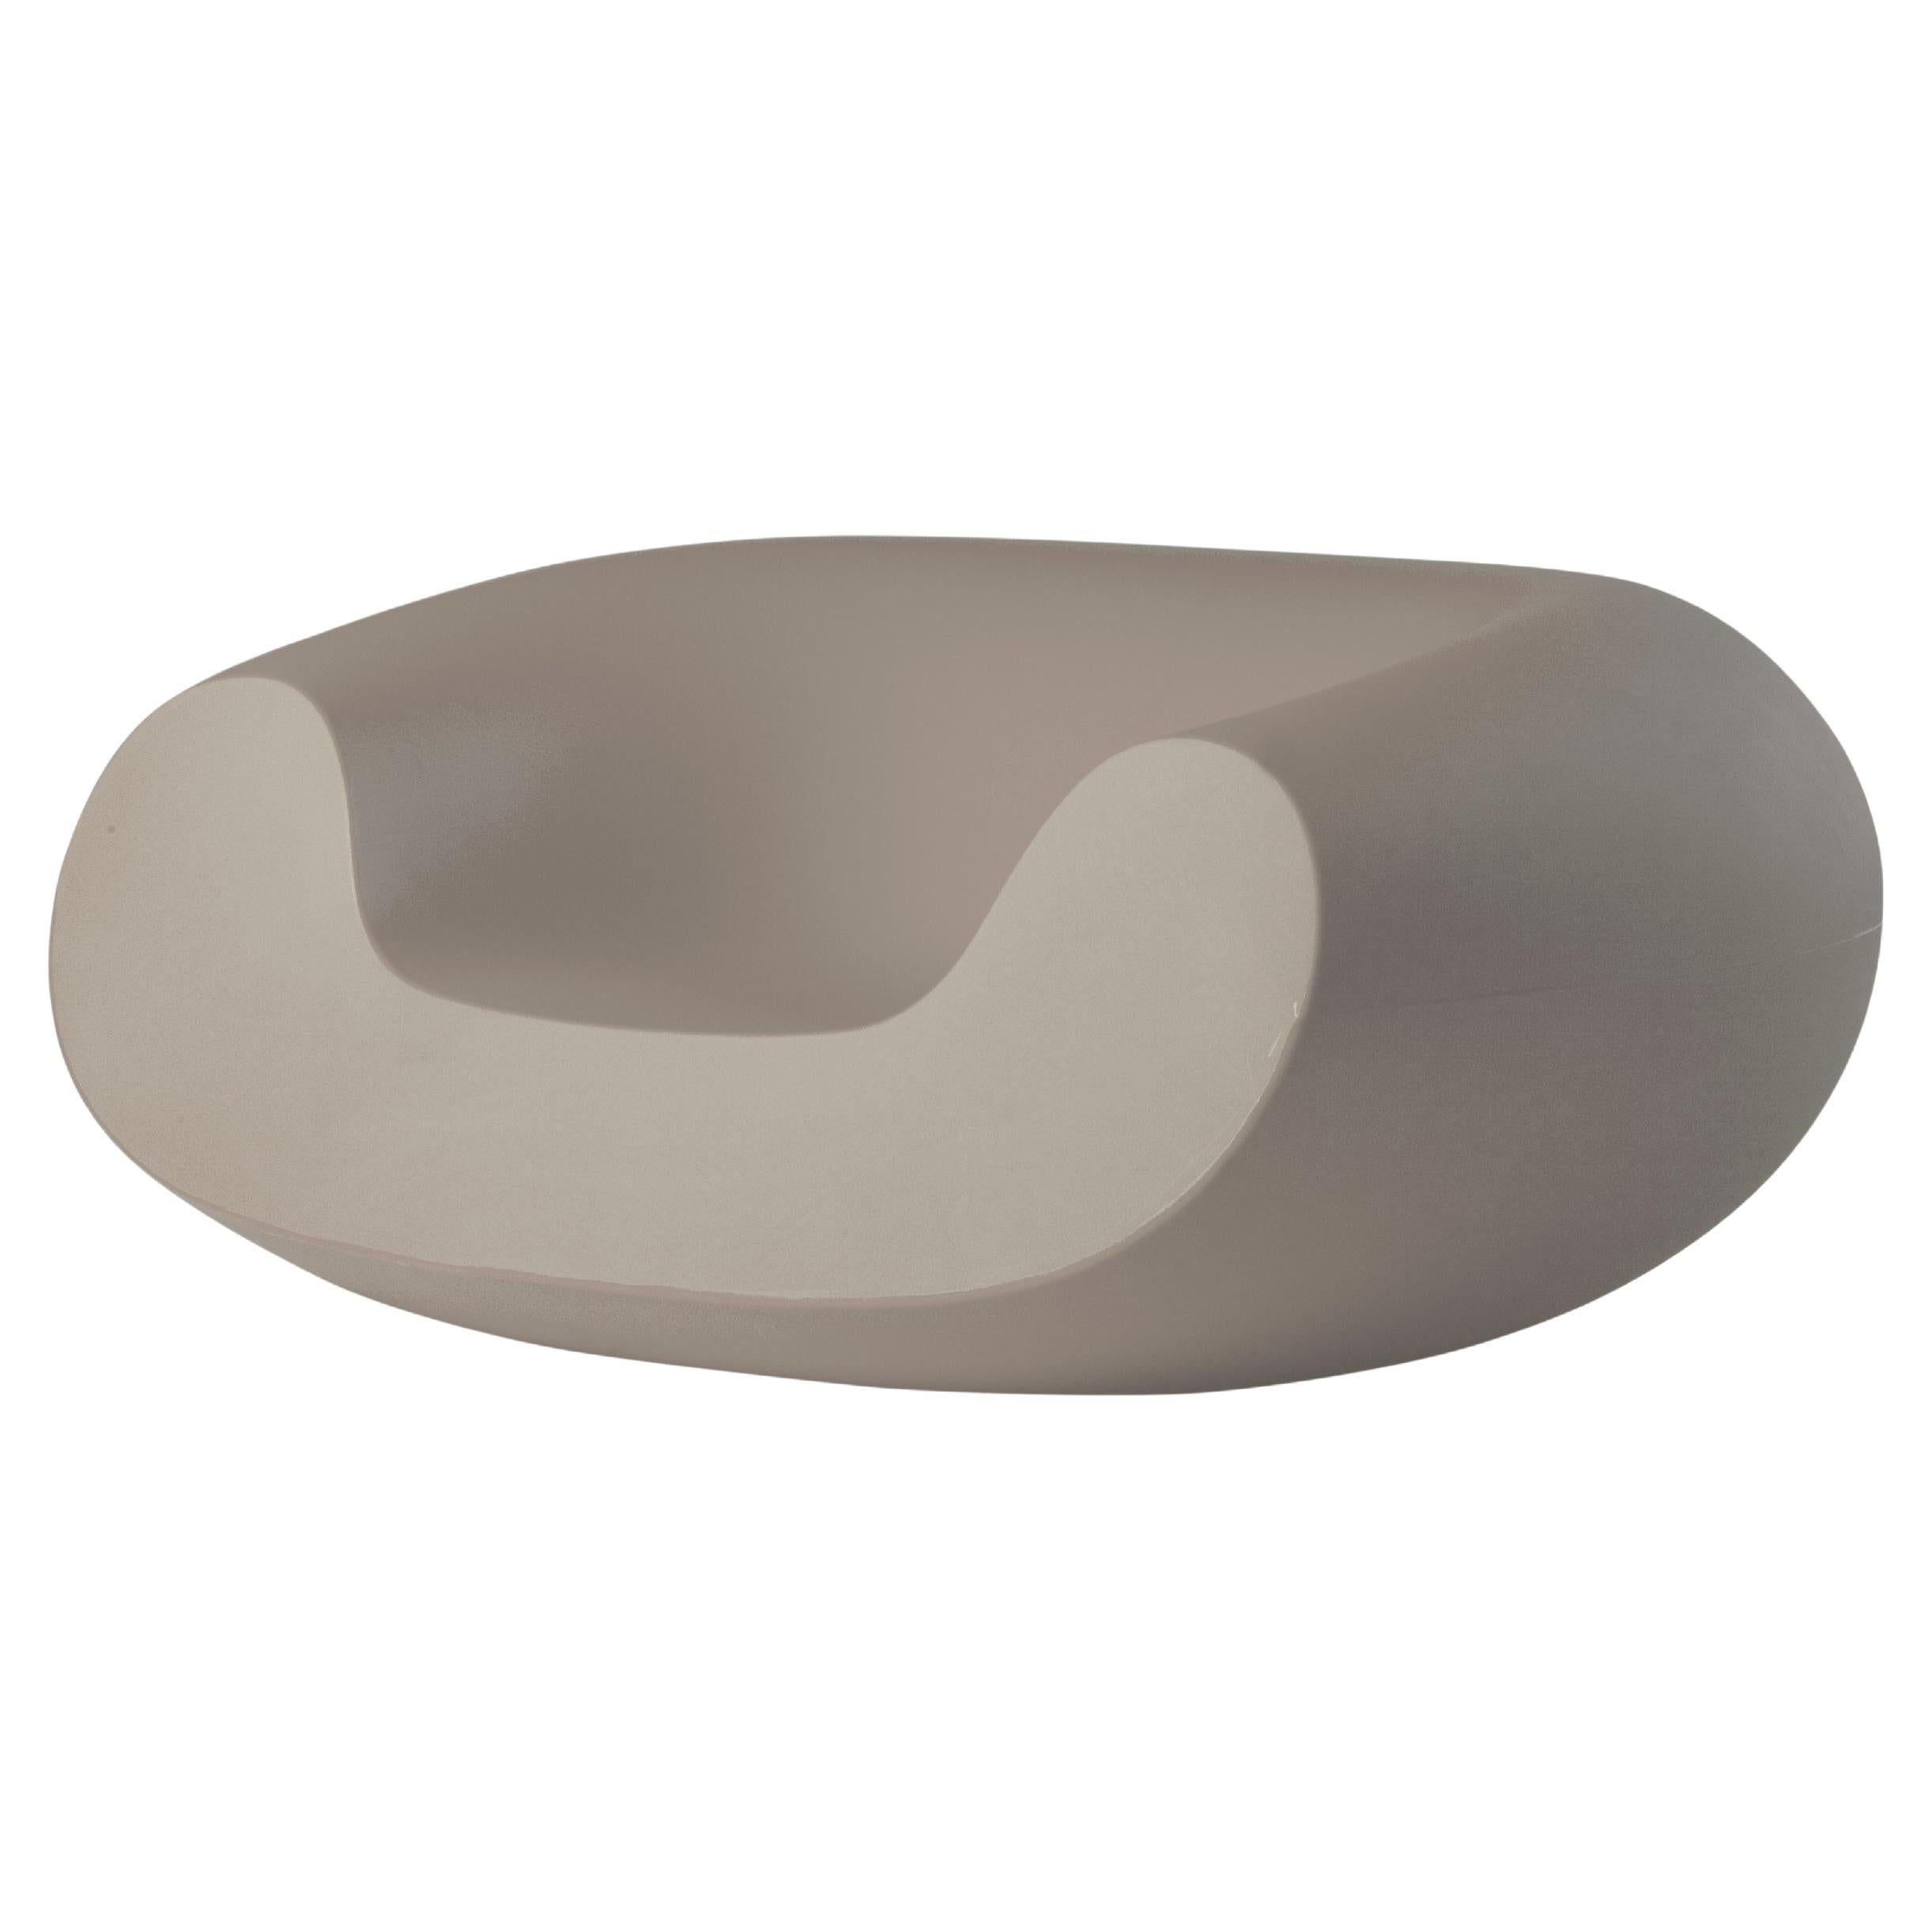 Slide Design Chubby Lounge Armchair in Dove Gray by Marcel Wanders